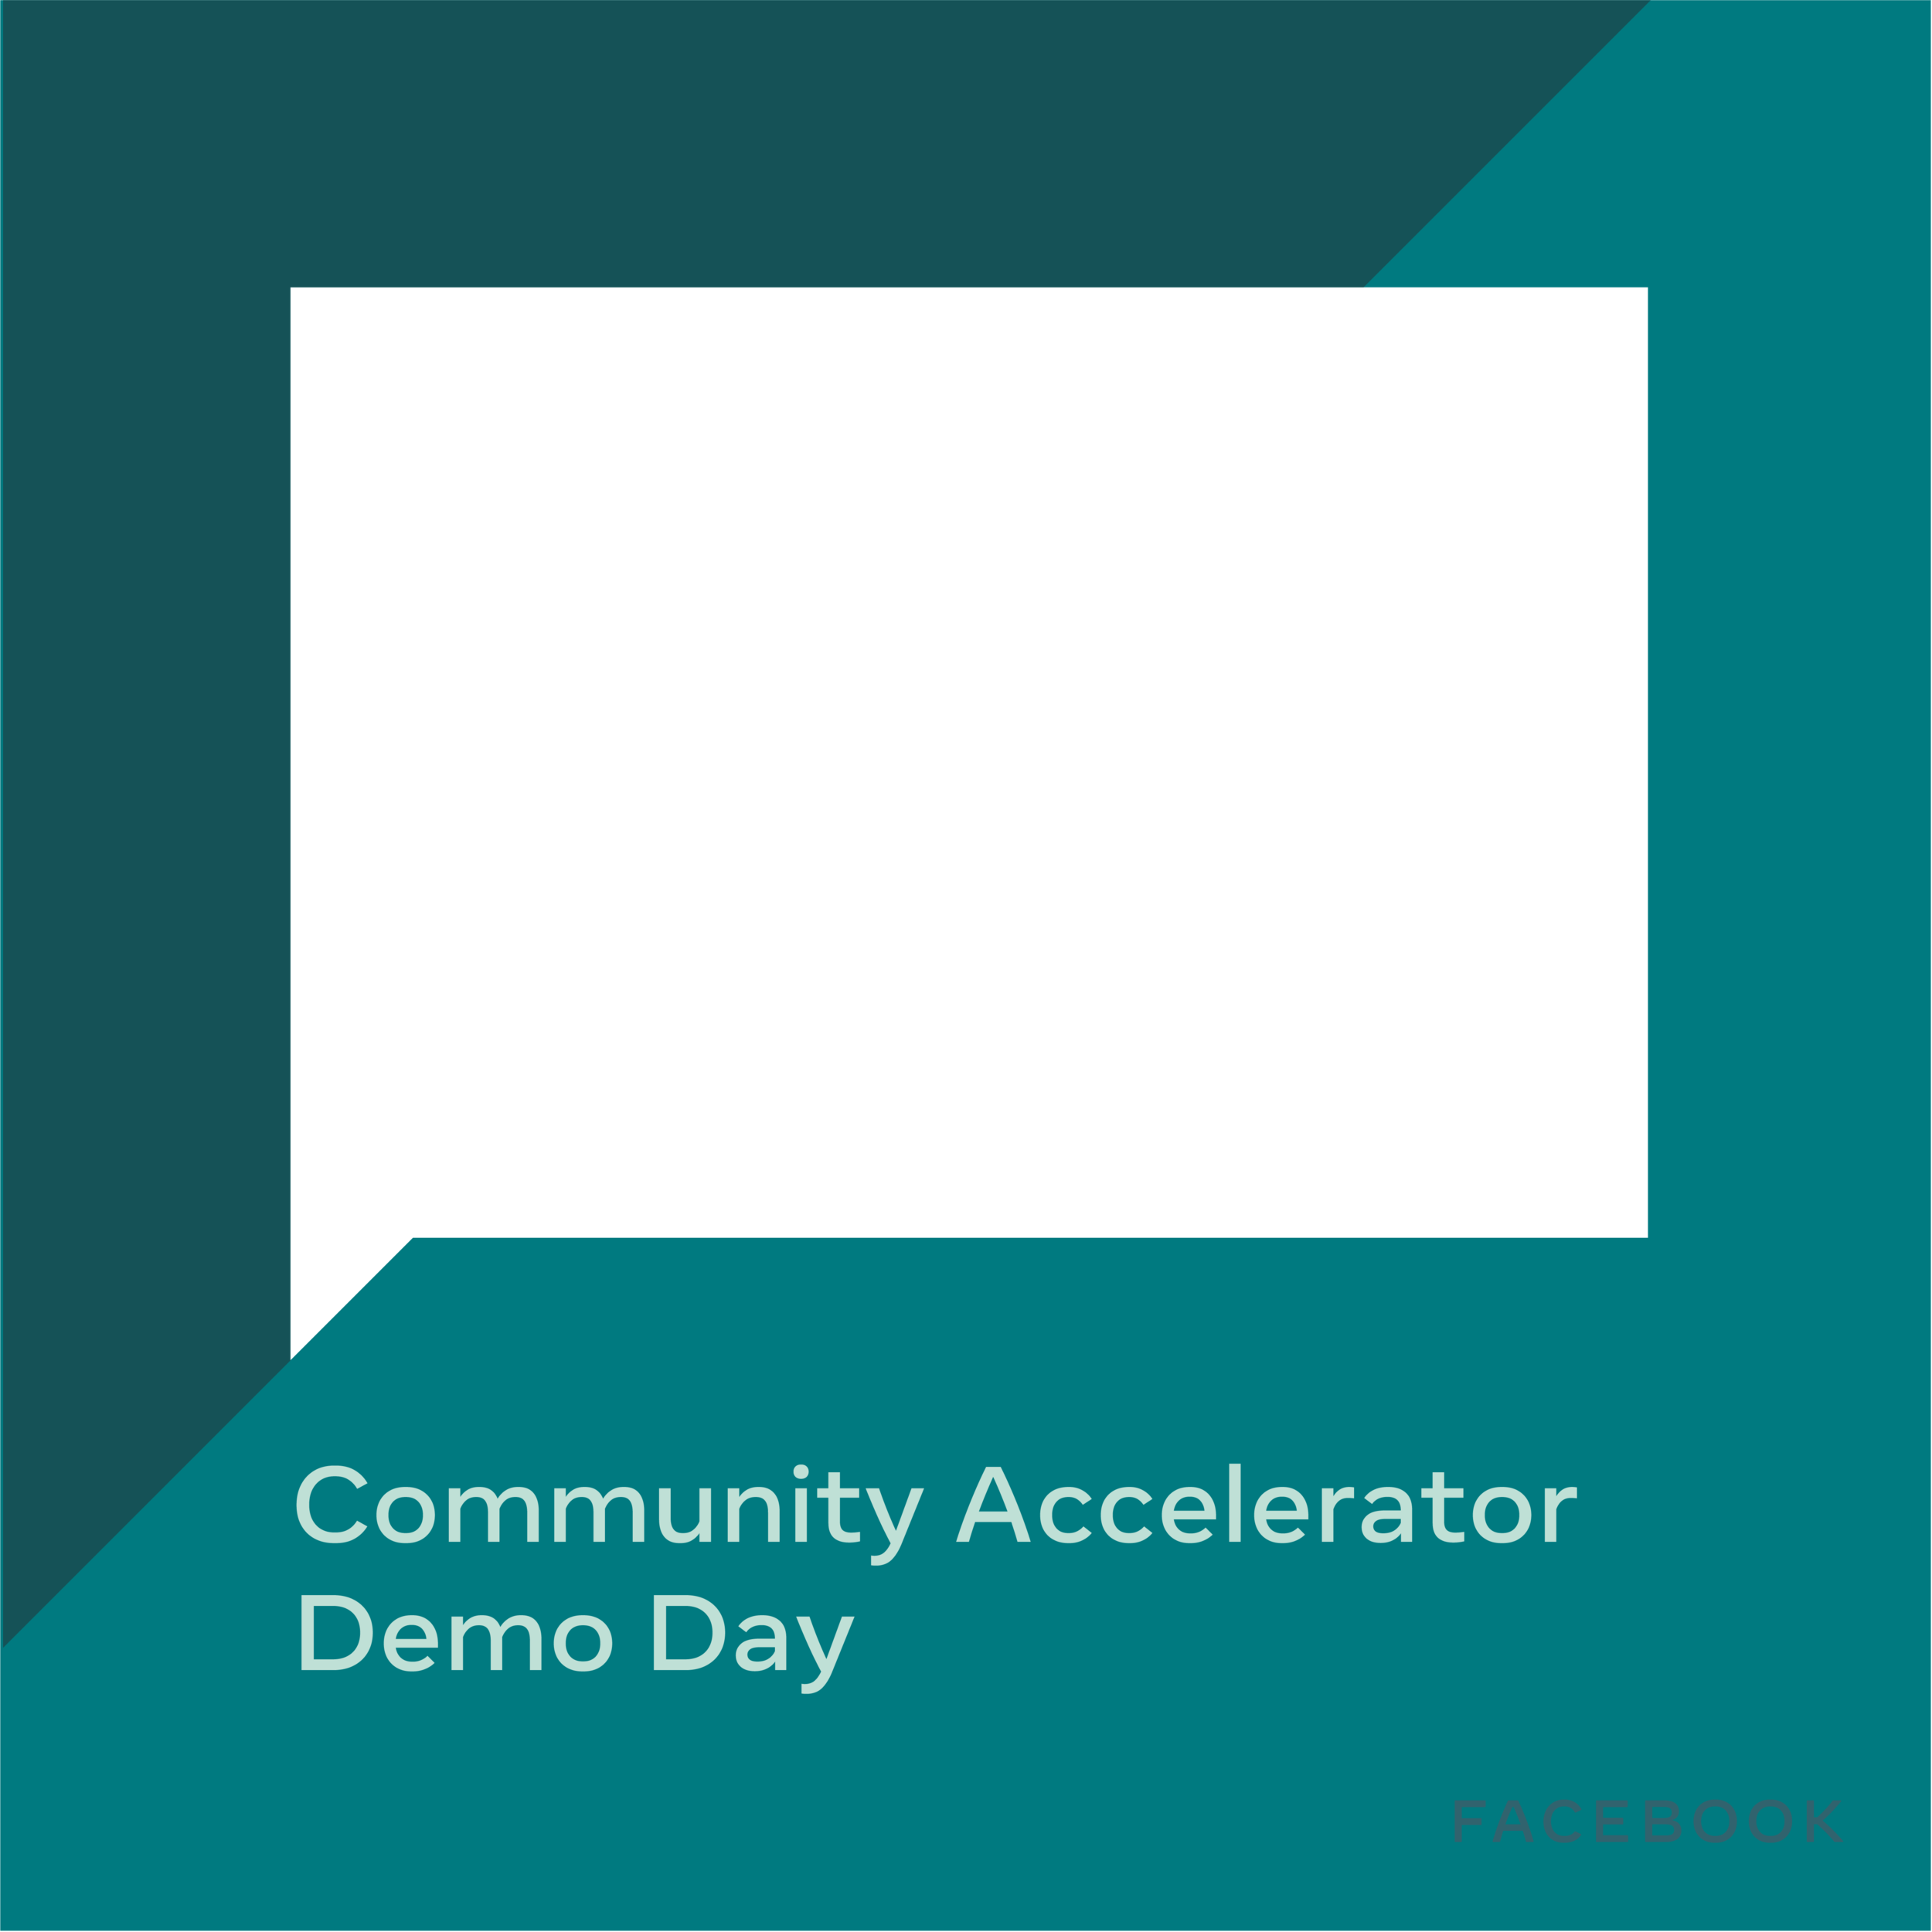 Accelerator_DemoDay_Participants_1080x1080_Global-1.png